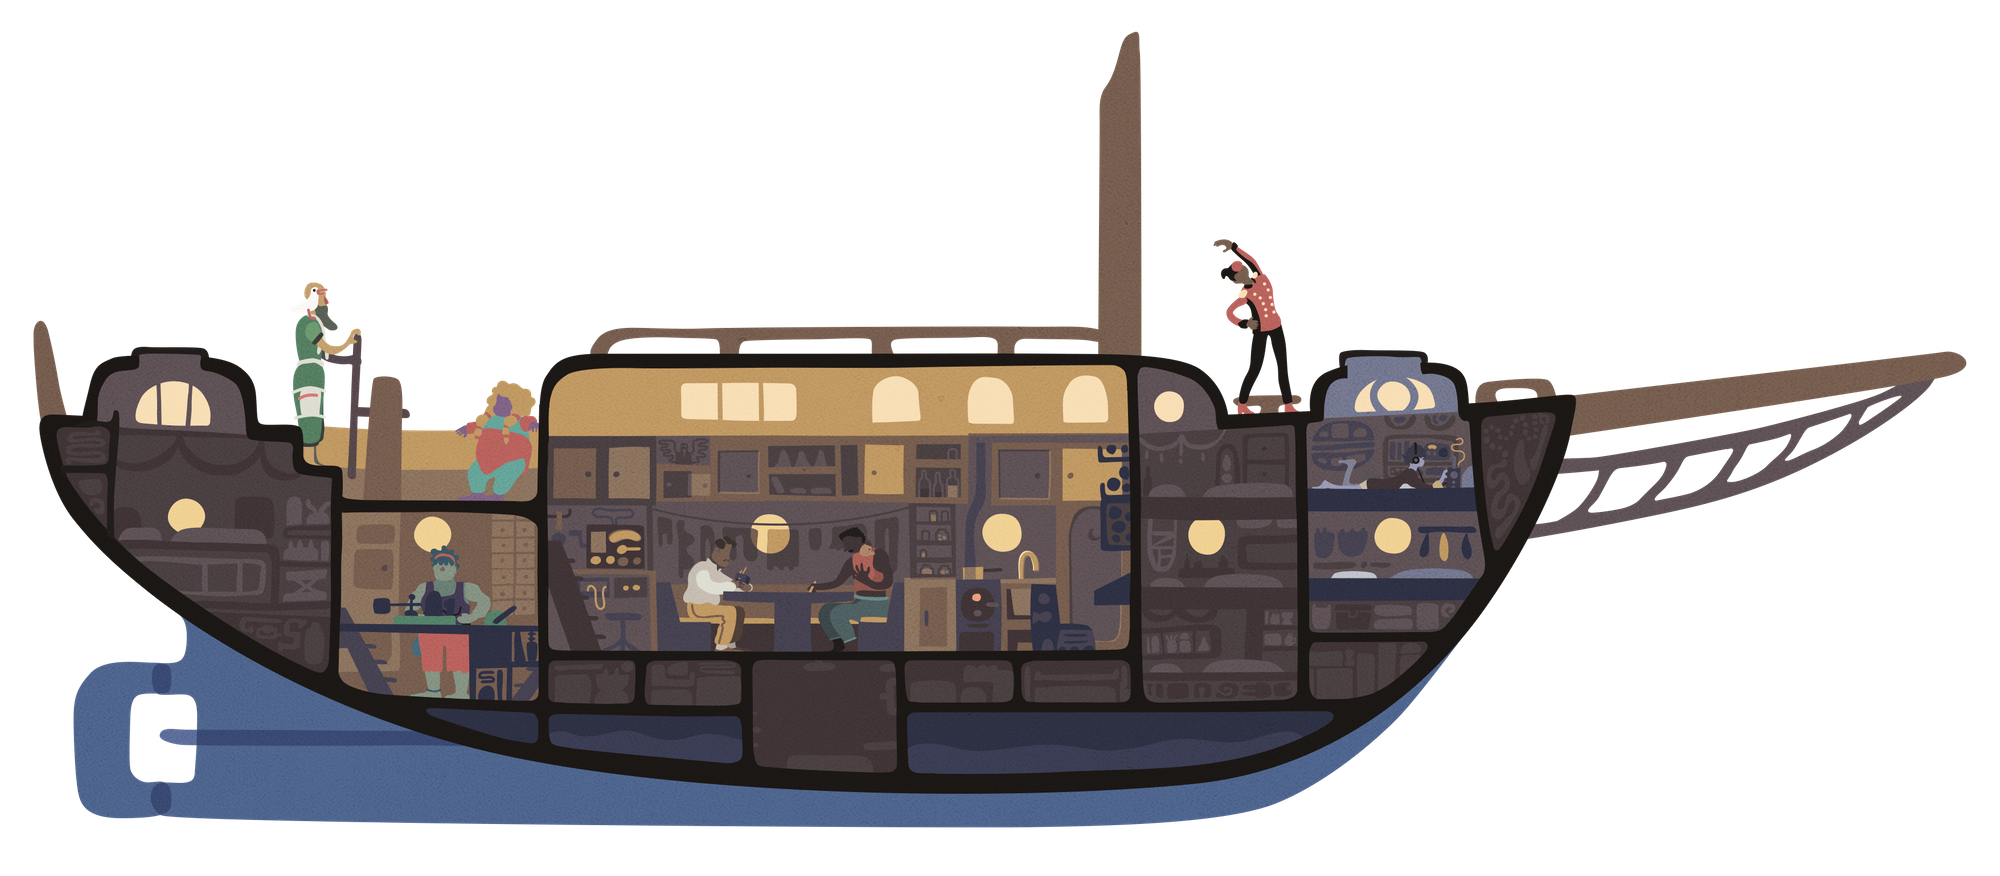 An image of a cross section of the ship De Kelpie, with 6 characters from SALTSEA CHRONICLES positioned variously throughout